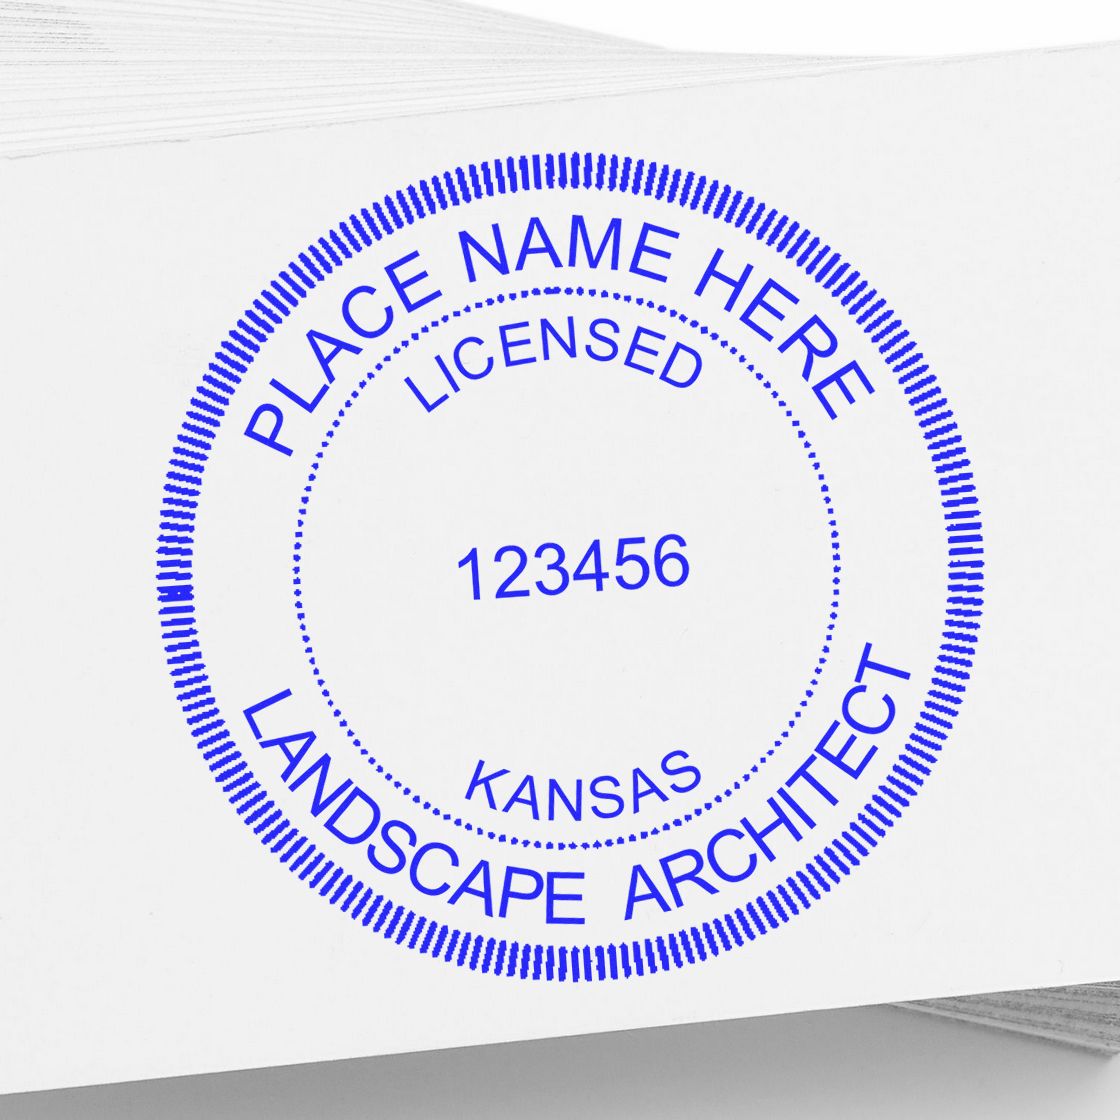 Another Example of a stamped impression of the Slim Pre-Inked Kansas Landscape Architect Seal Stamp on a piece of office paper.